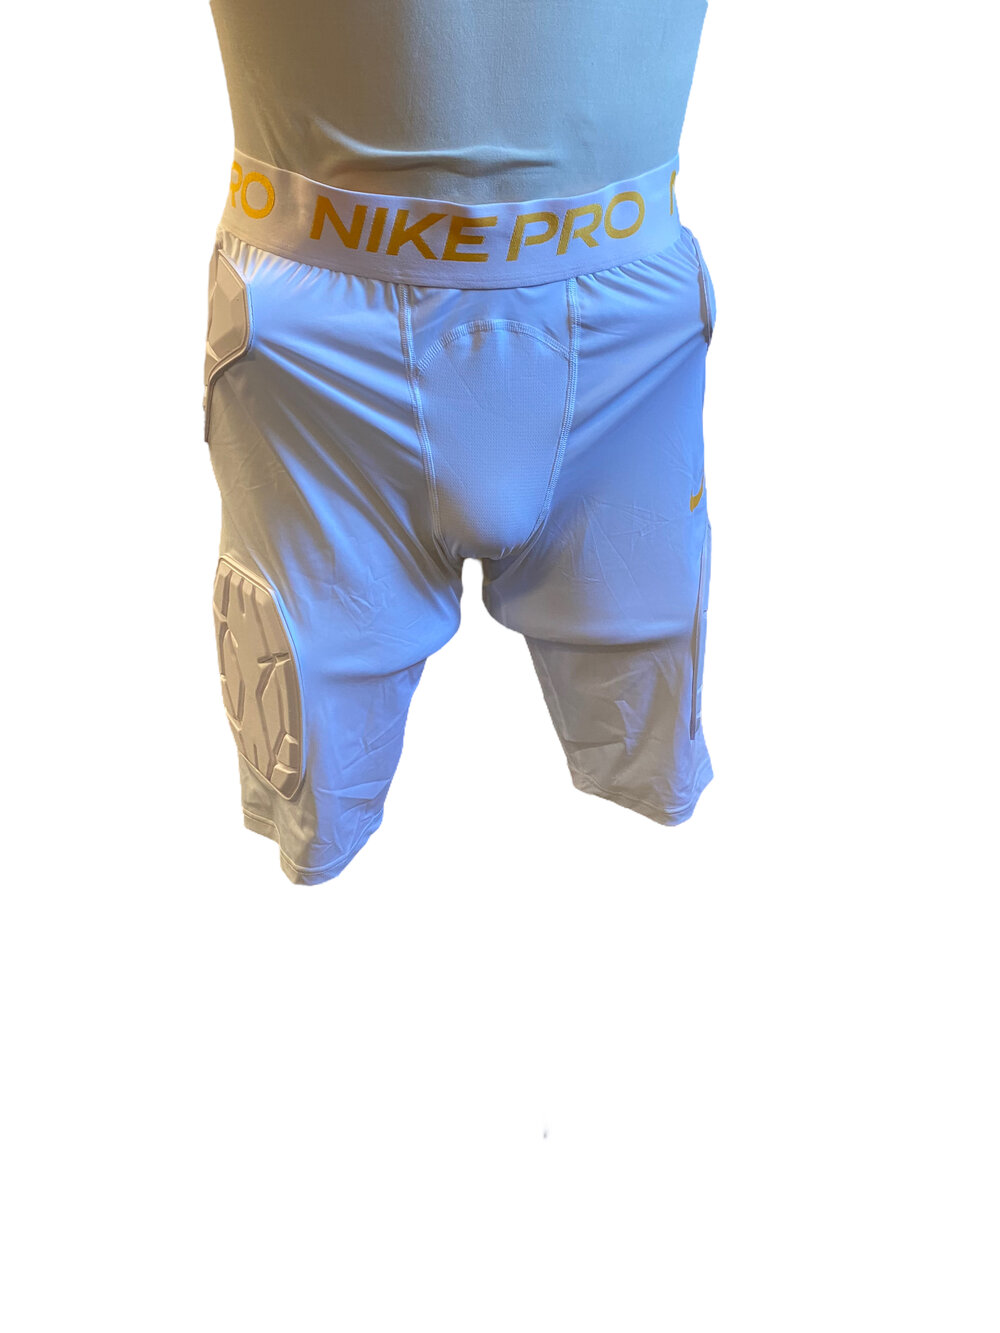 New with Tags, Men's Nike Pro Hyperstrong Football Girdle, size 3XL —  Mercer Island Thrift Shop